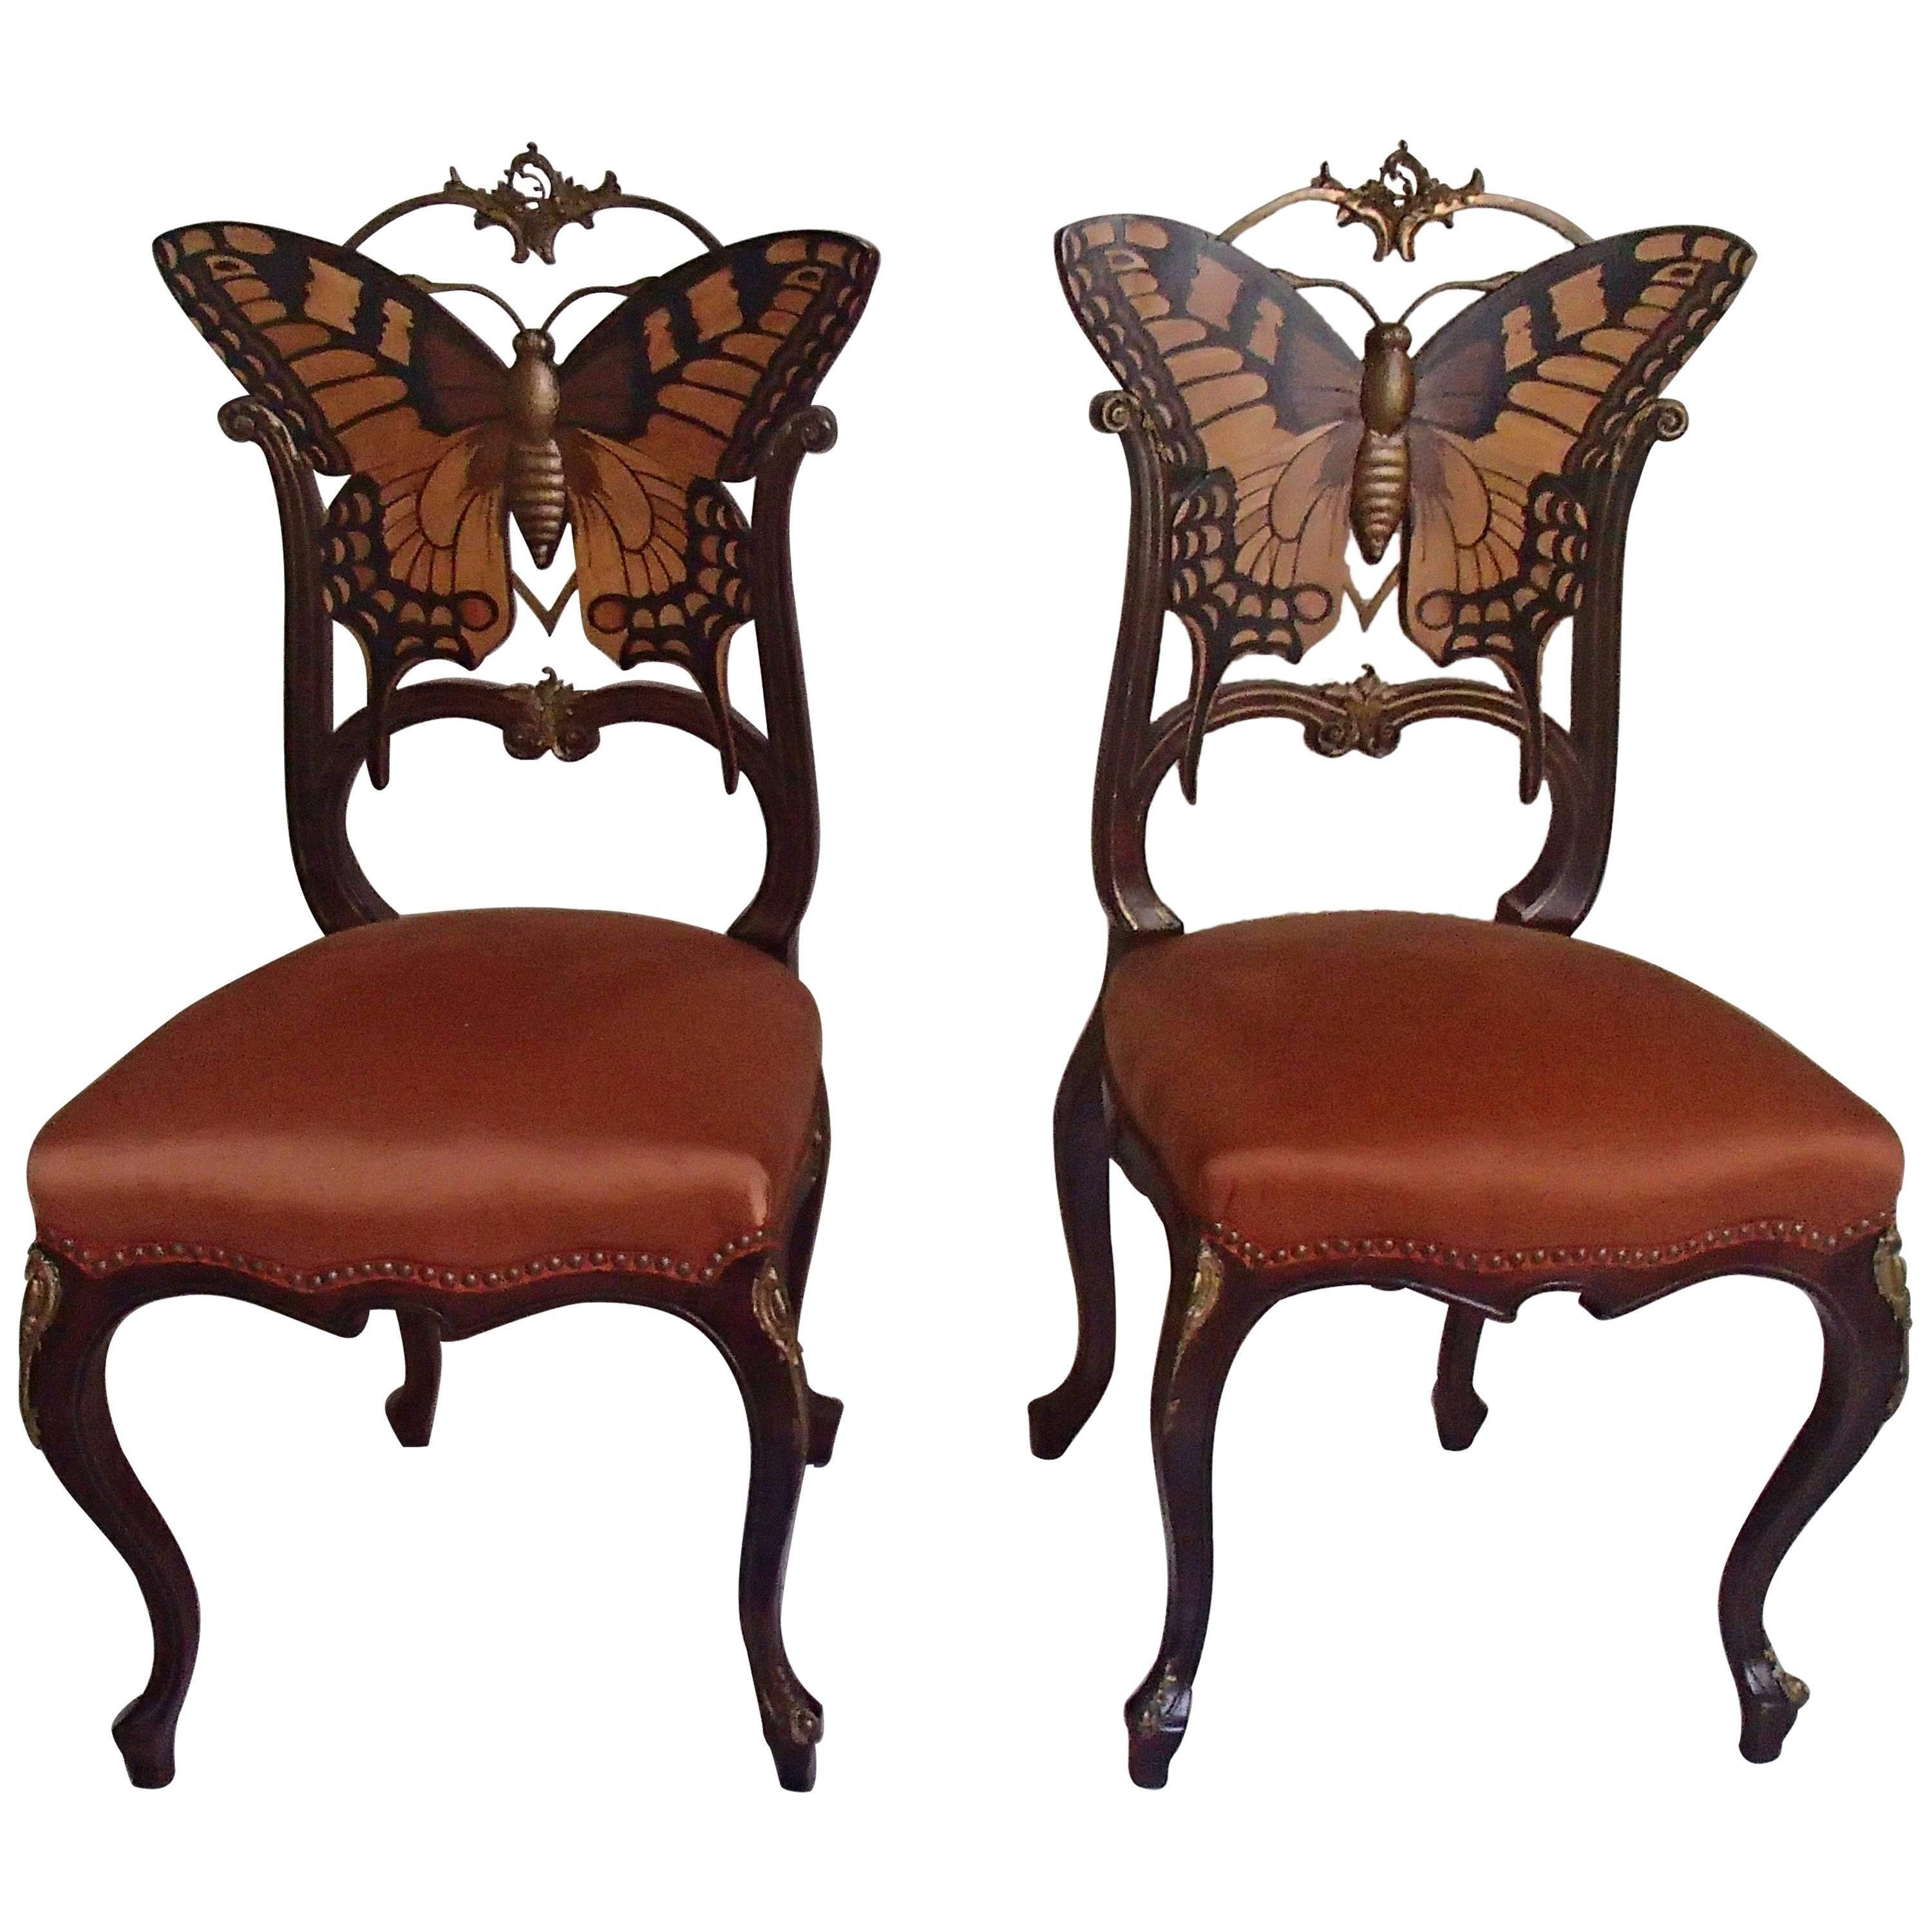 Pair of Early Art Nouveau Butterfly Chairs Inlays and Brass